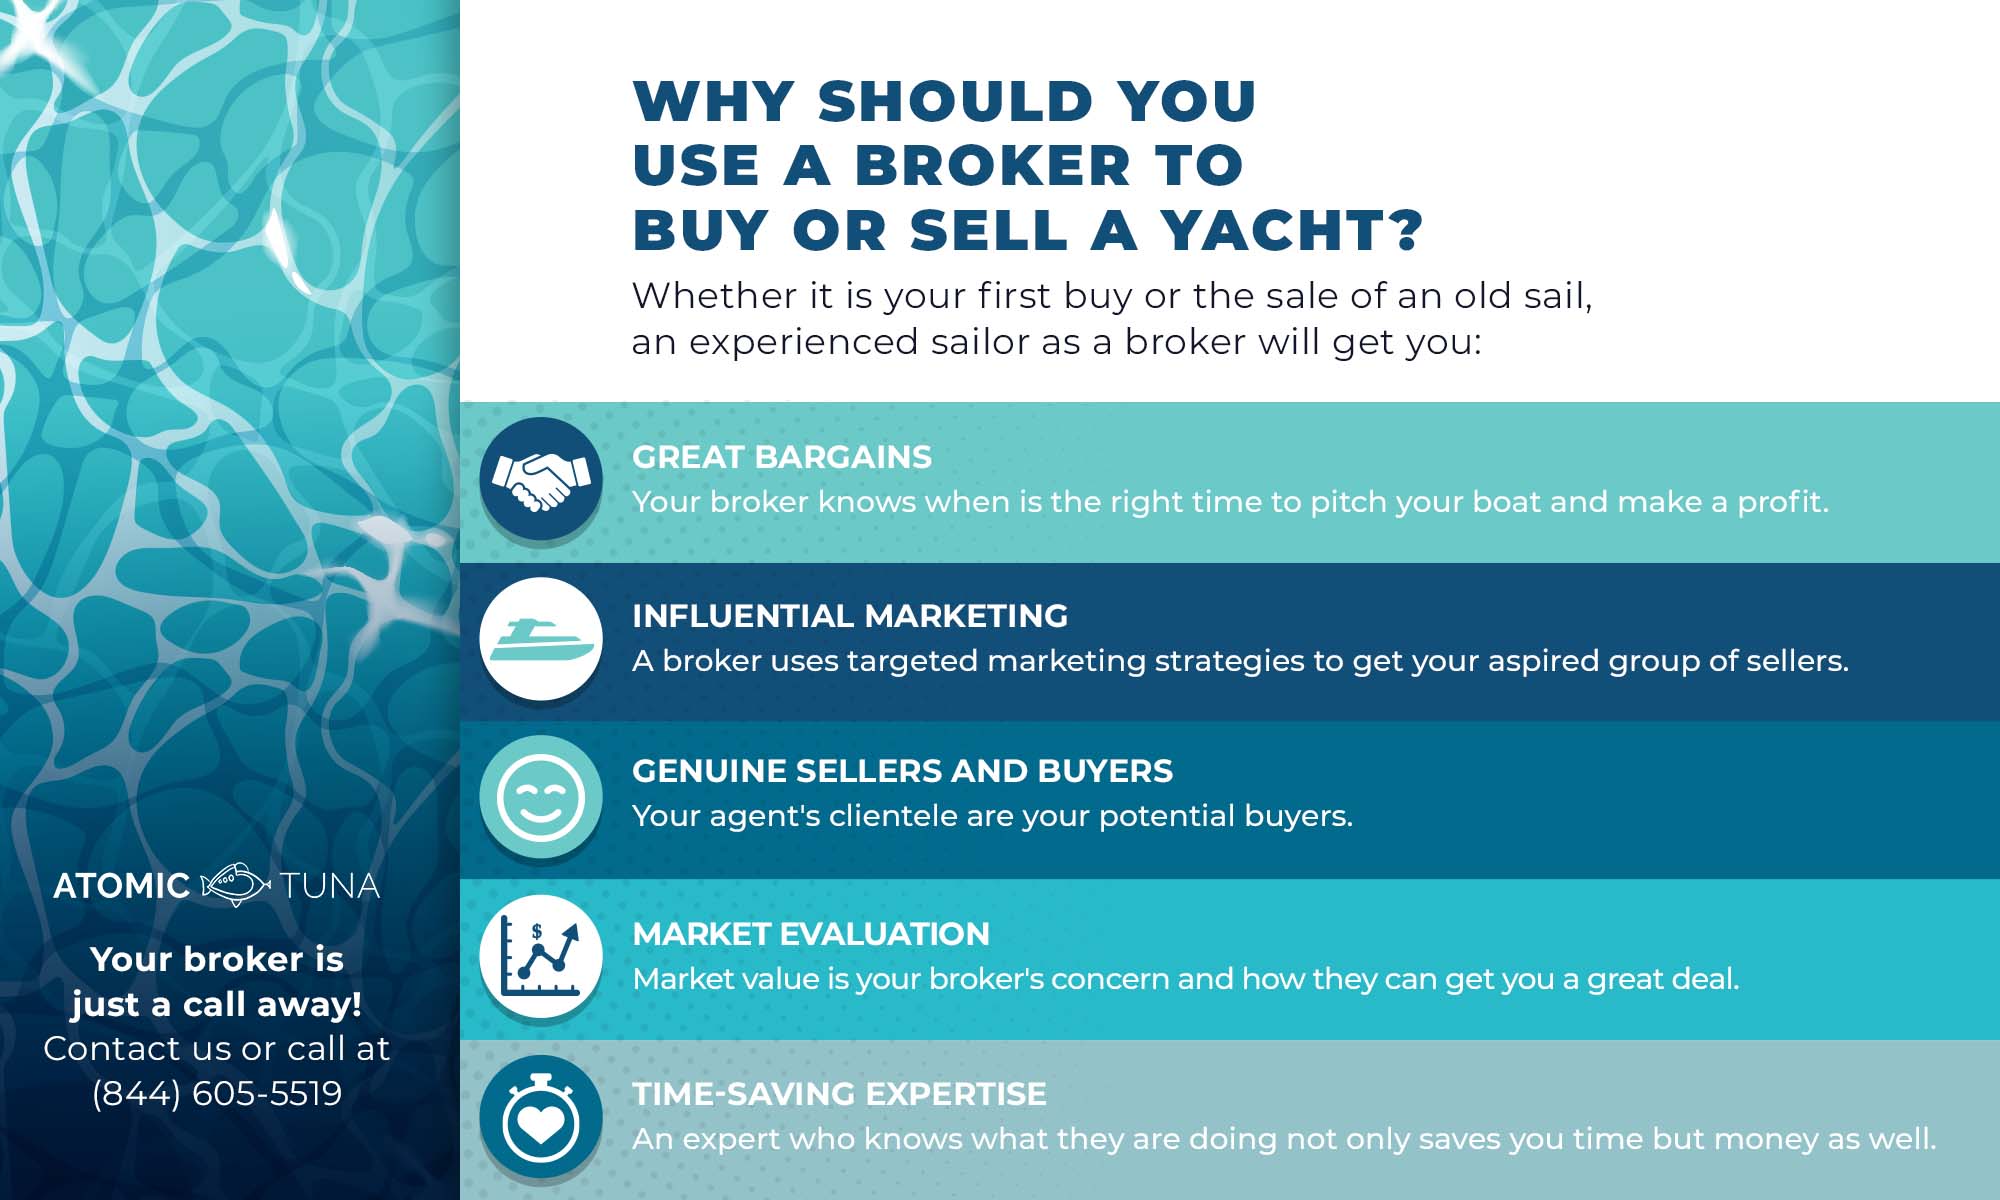 Why should you use a broker to buy or sell a Yacht